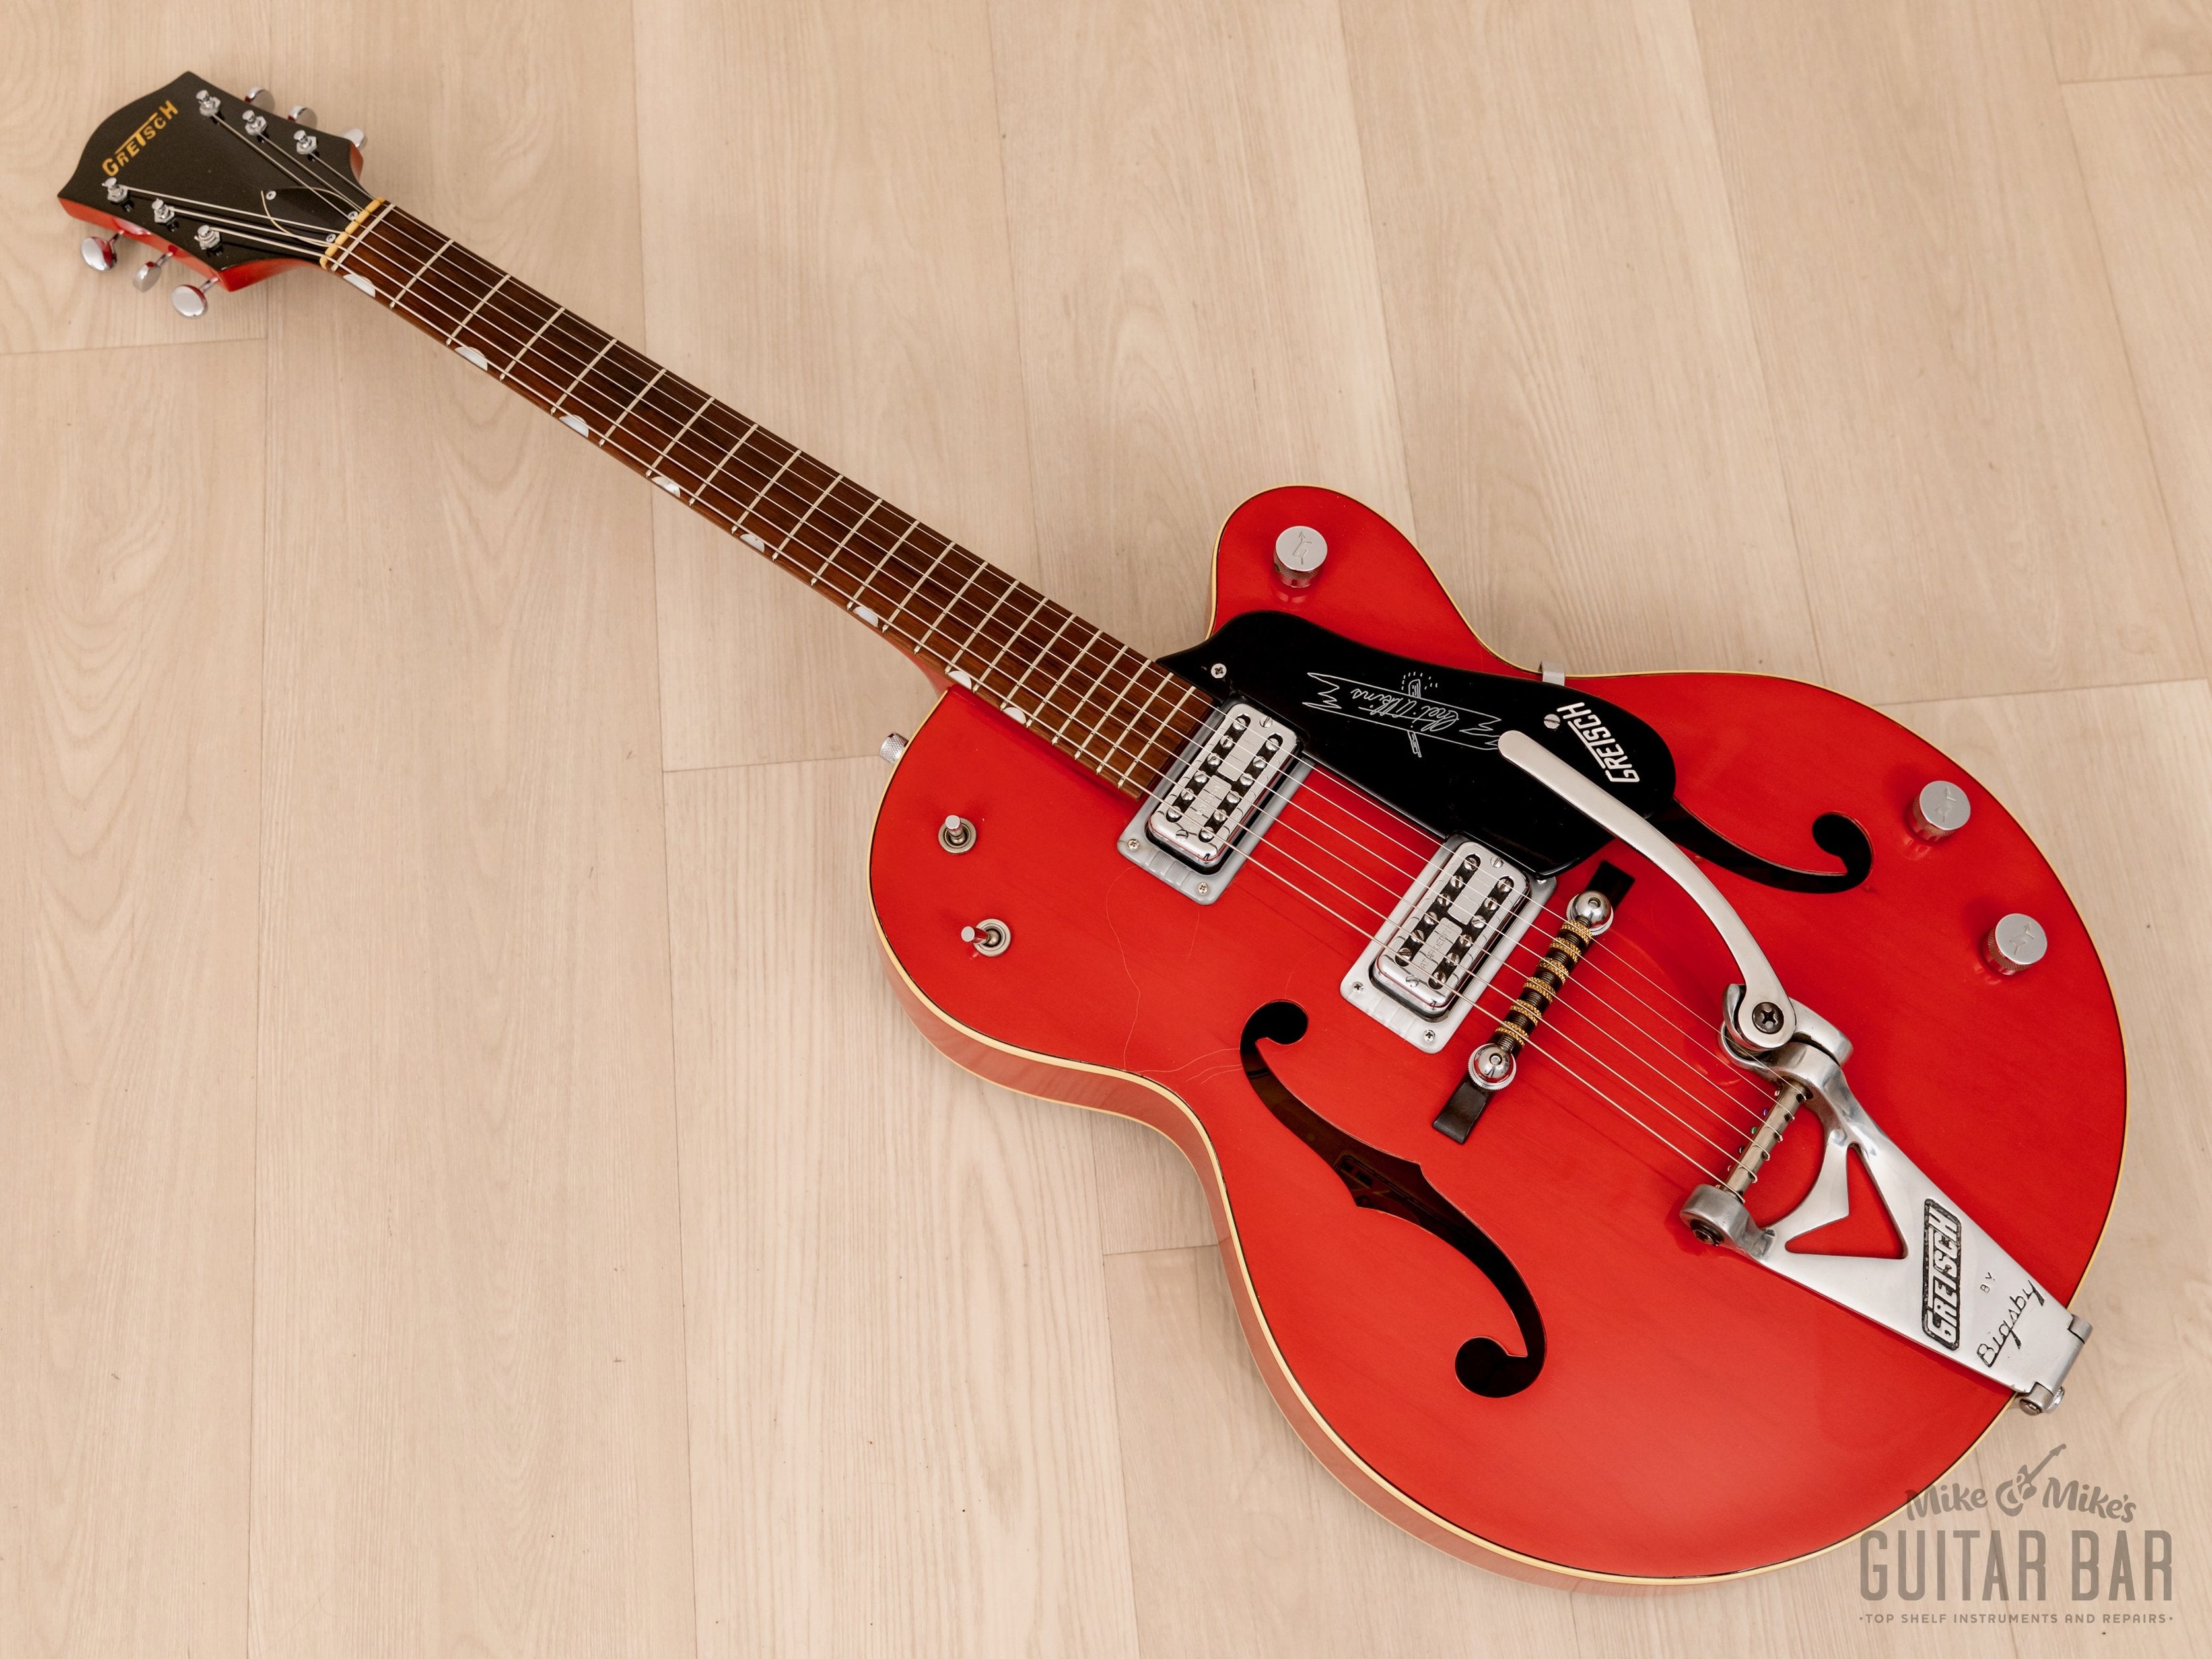 1960 Gretsch 6119 Chet Atkins Tennessean, 6120 Conversion w/ PAF FilterTrons, Trestle Bracing, Case